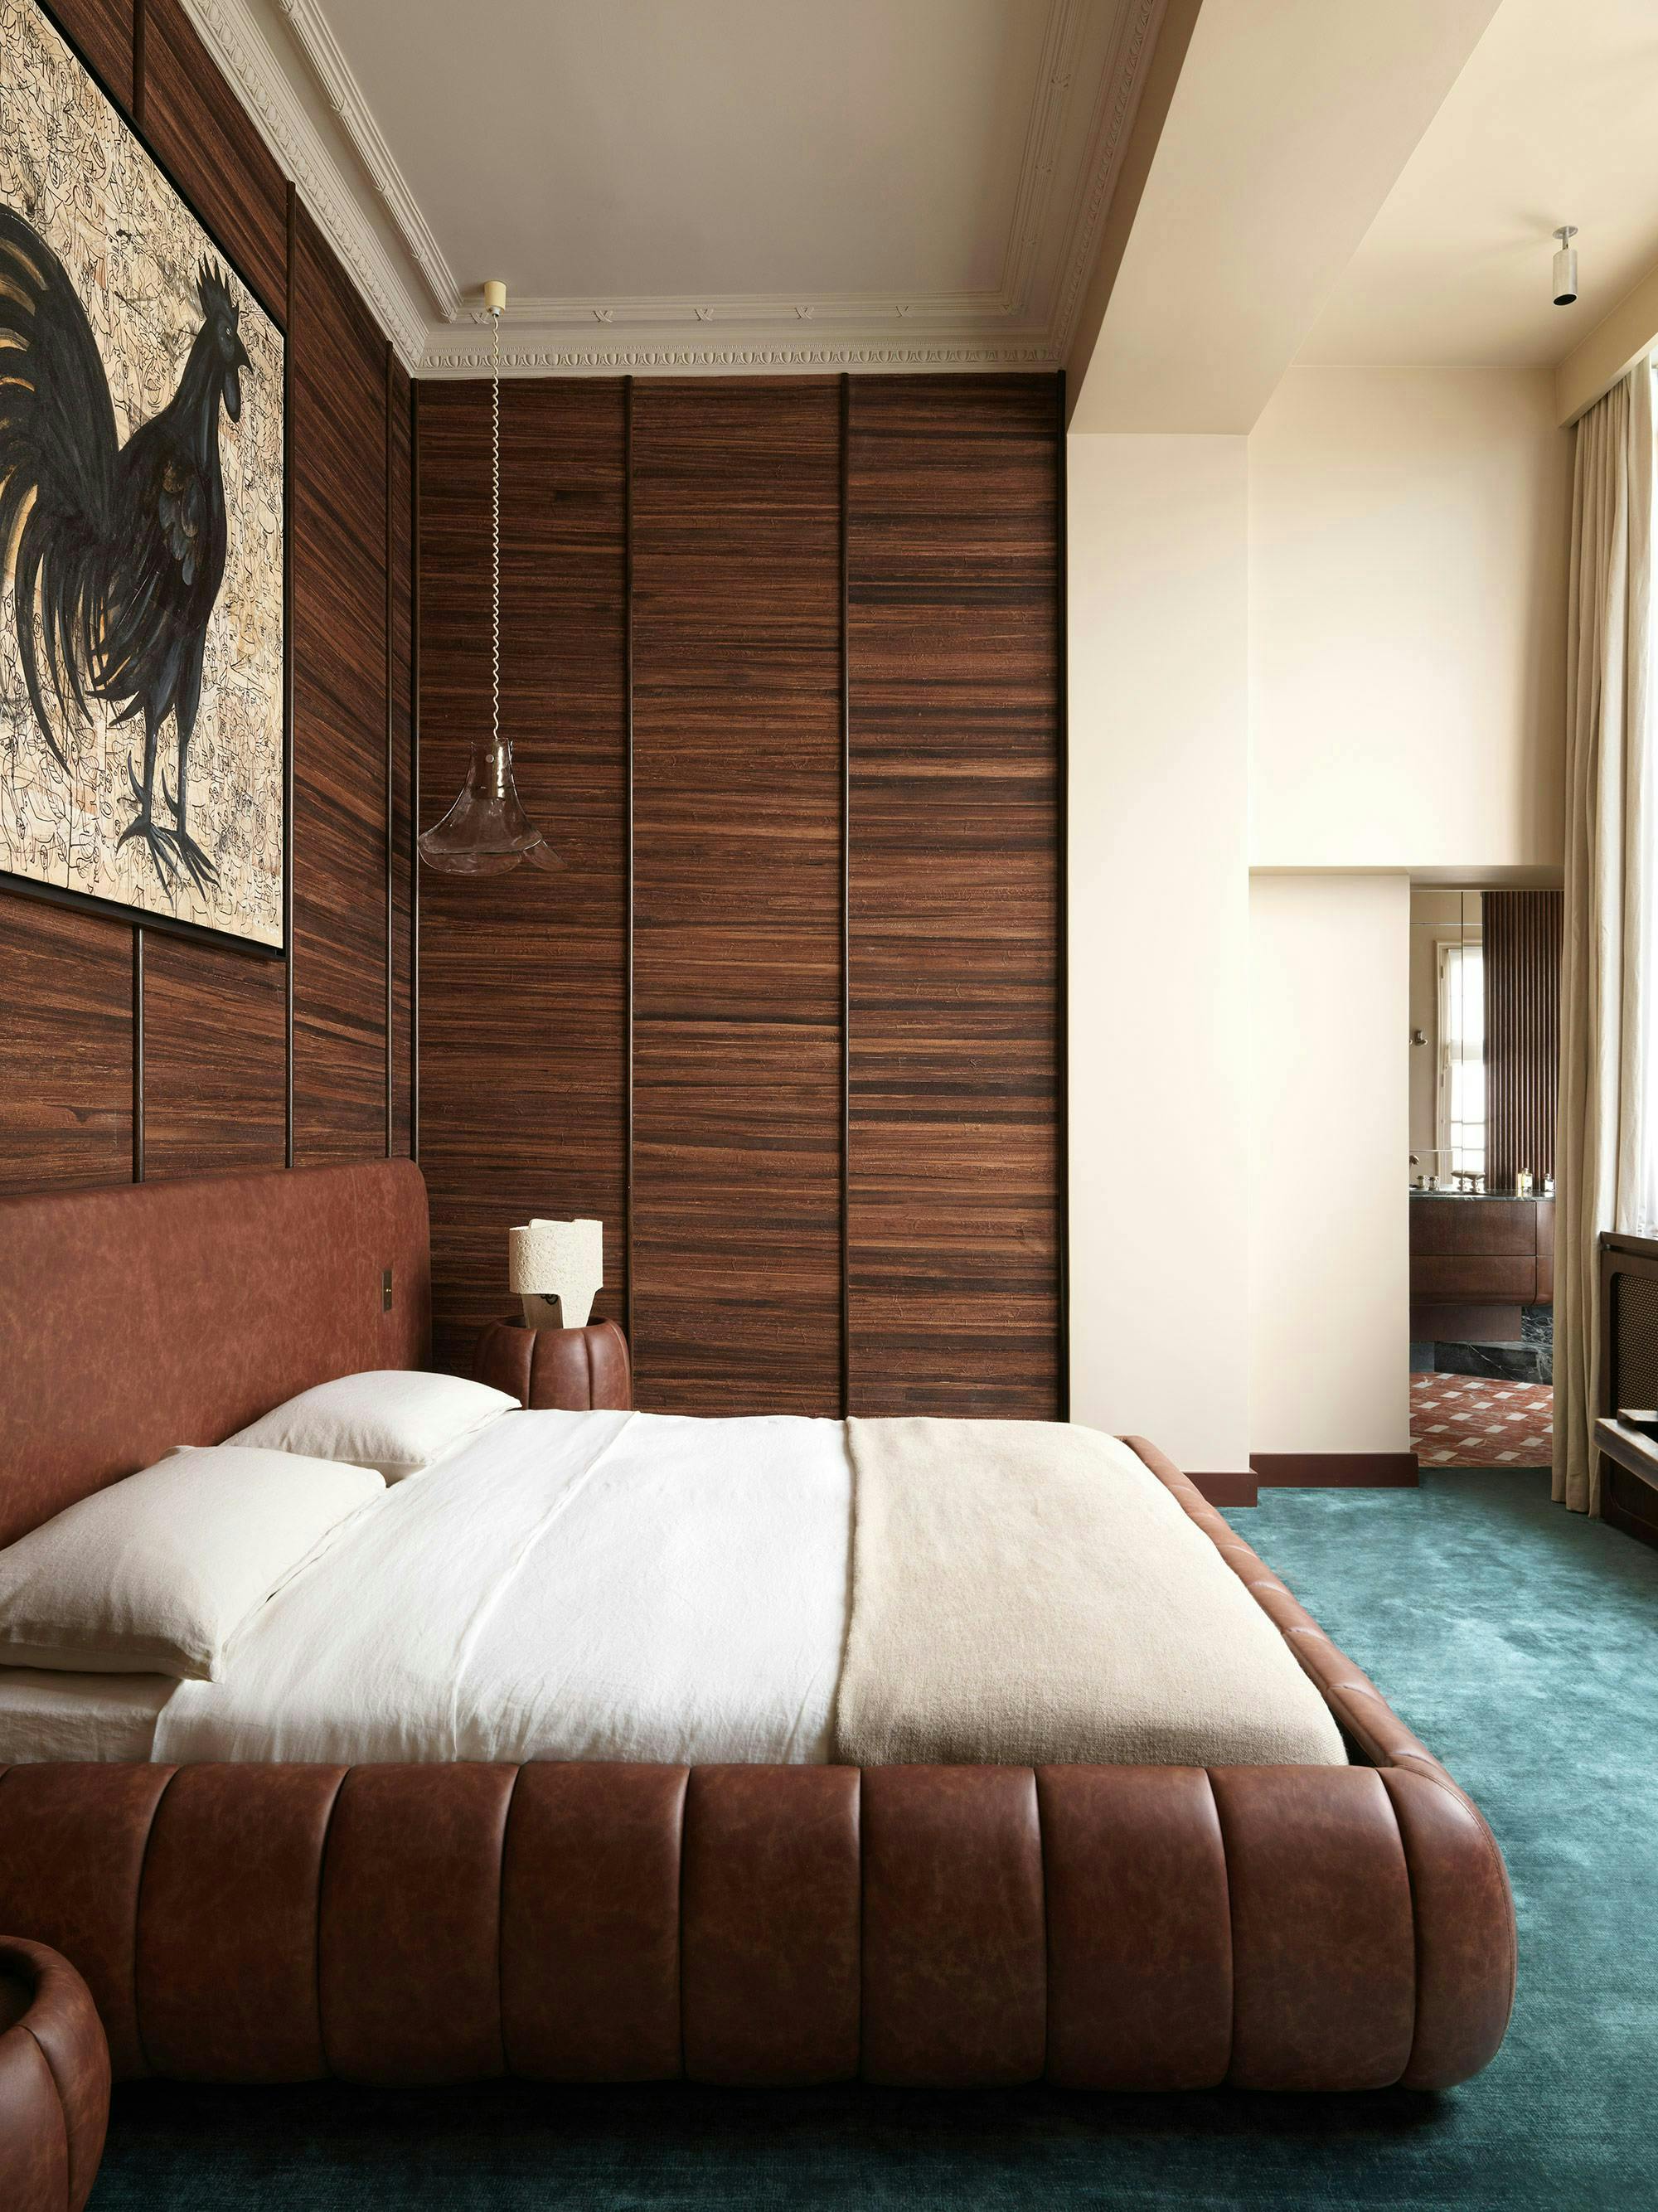 room with wood wall paneling and blue carpet